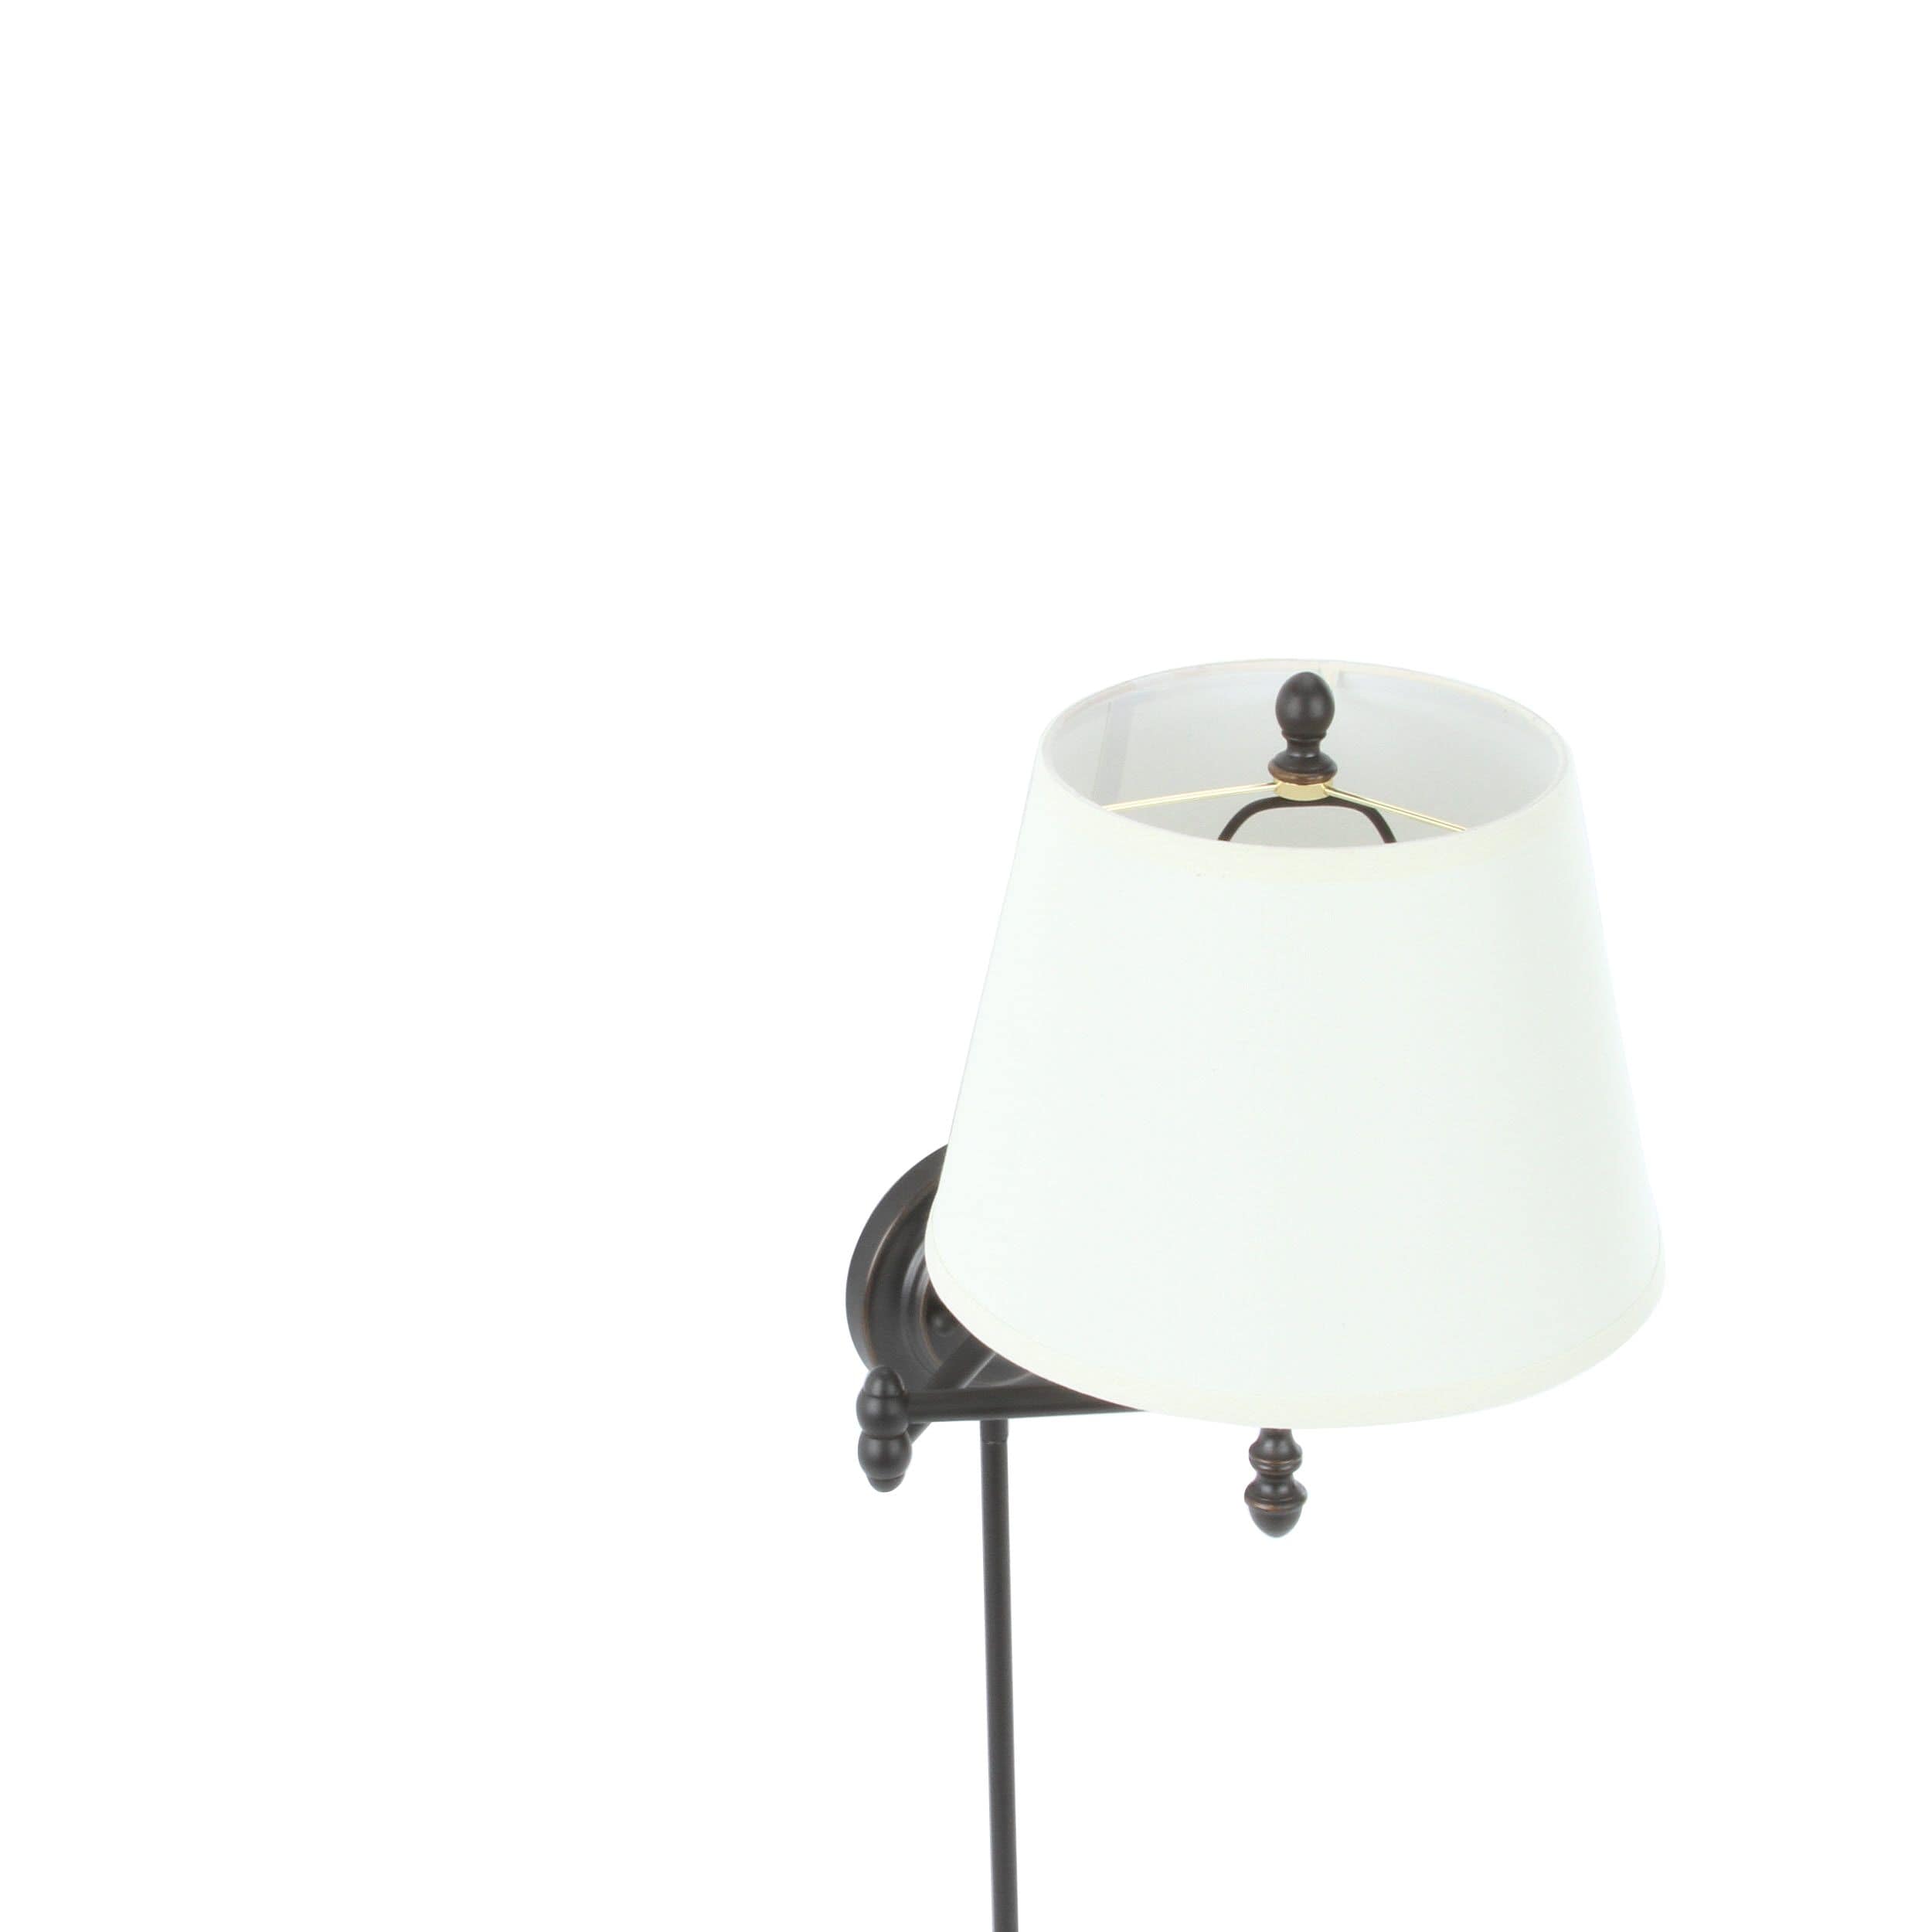 Details about   Little Plug-in Wall Lamp Wall Light Sconce 